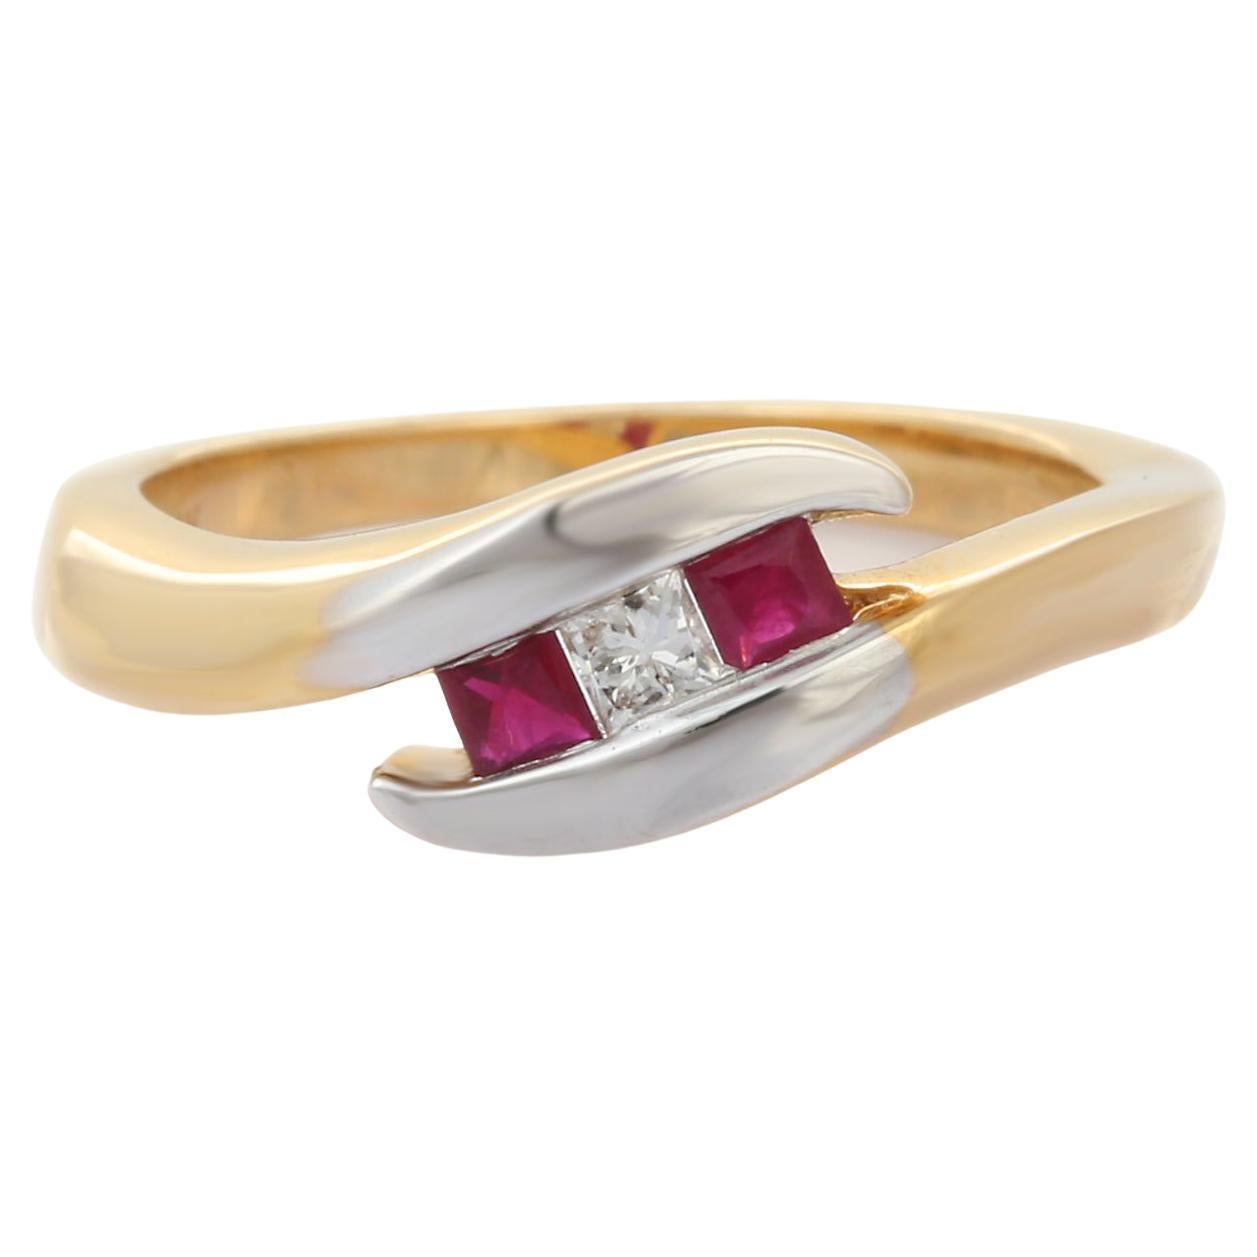 For Sale:  18K Yellow Gold Square Cut Ruby Sea Wave Ring with Diamonds